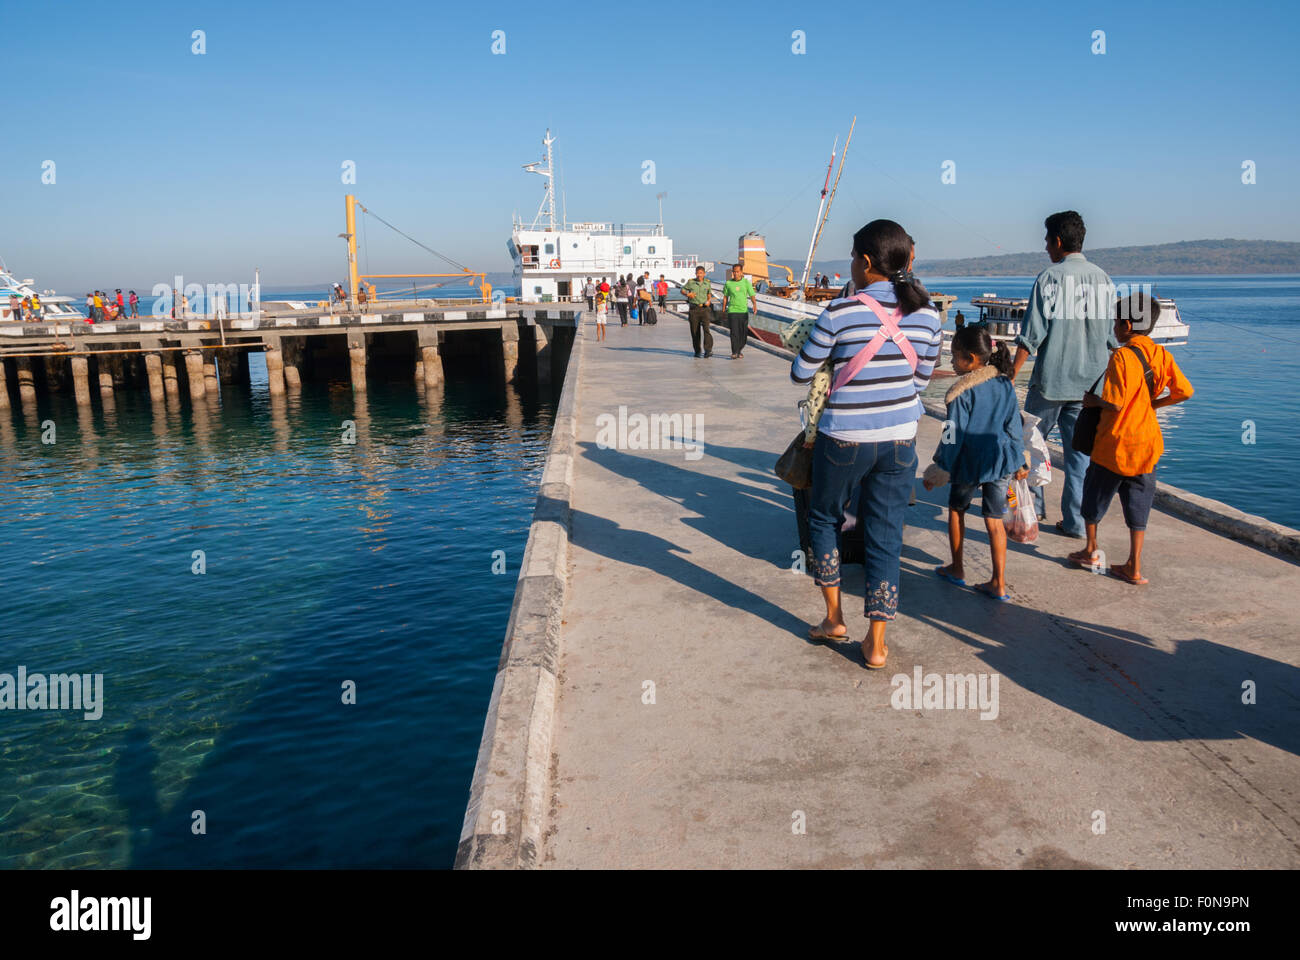 A family walking on jetty toward ferry boat at ferry harbour in Kupang, East Nusa Tenggara, Indonesia. Stock Photo